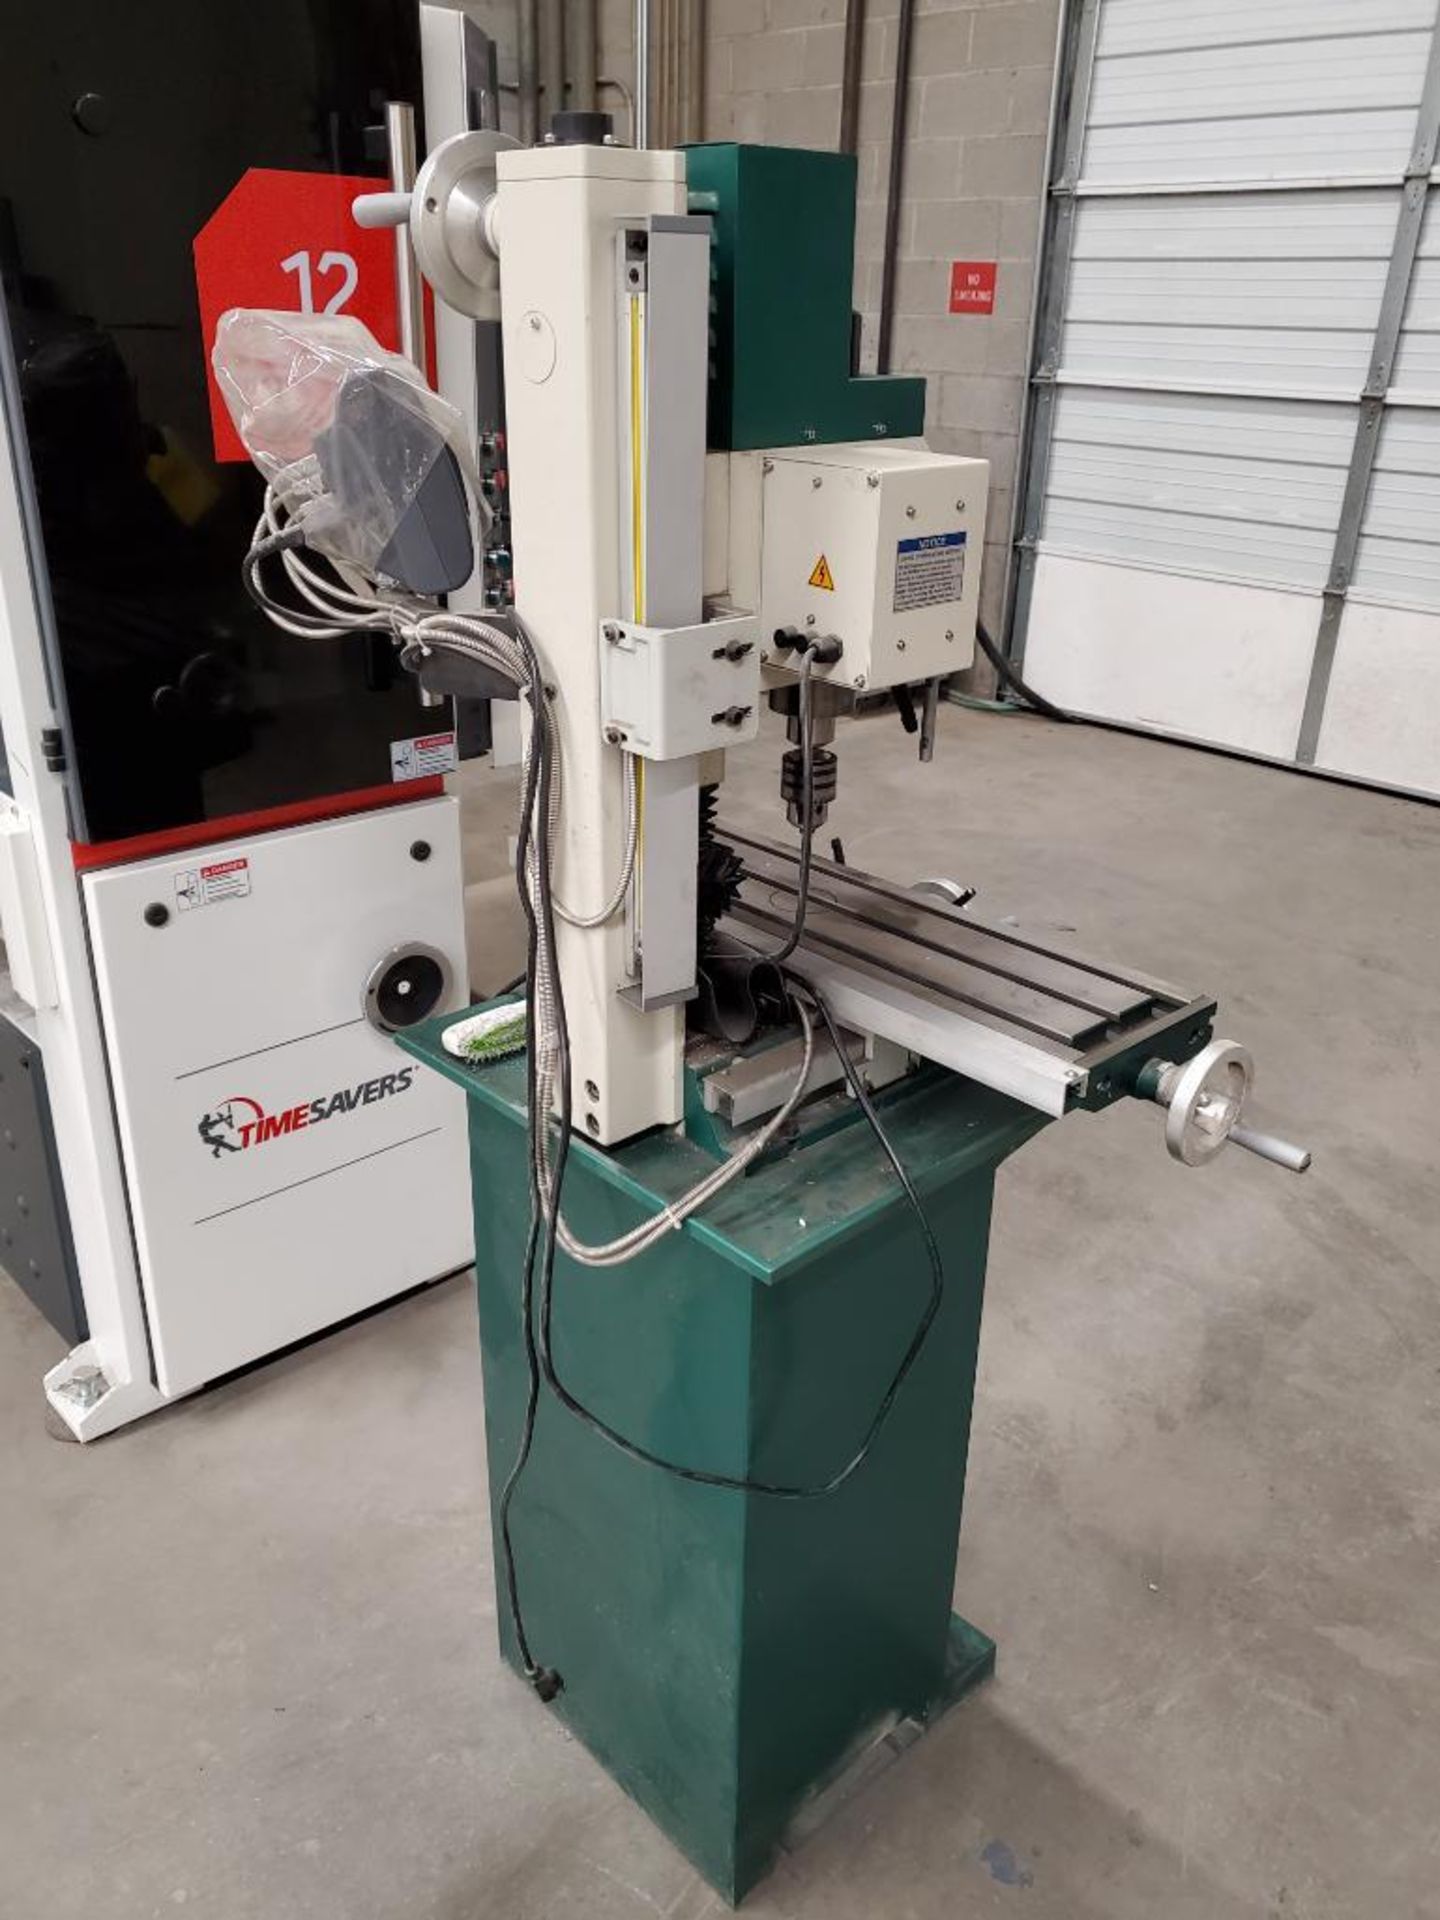 2021 Grizzly G0759 Vertical Milling/ Drilling Machine w/ Stand & 3-Axis Grizzly Dro Control, S/N 202 - Image 11 of 12